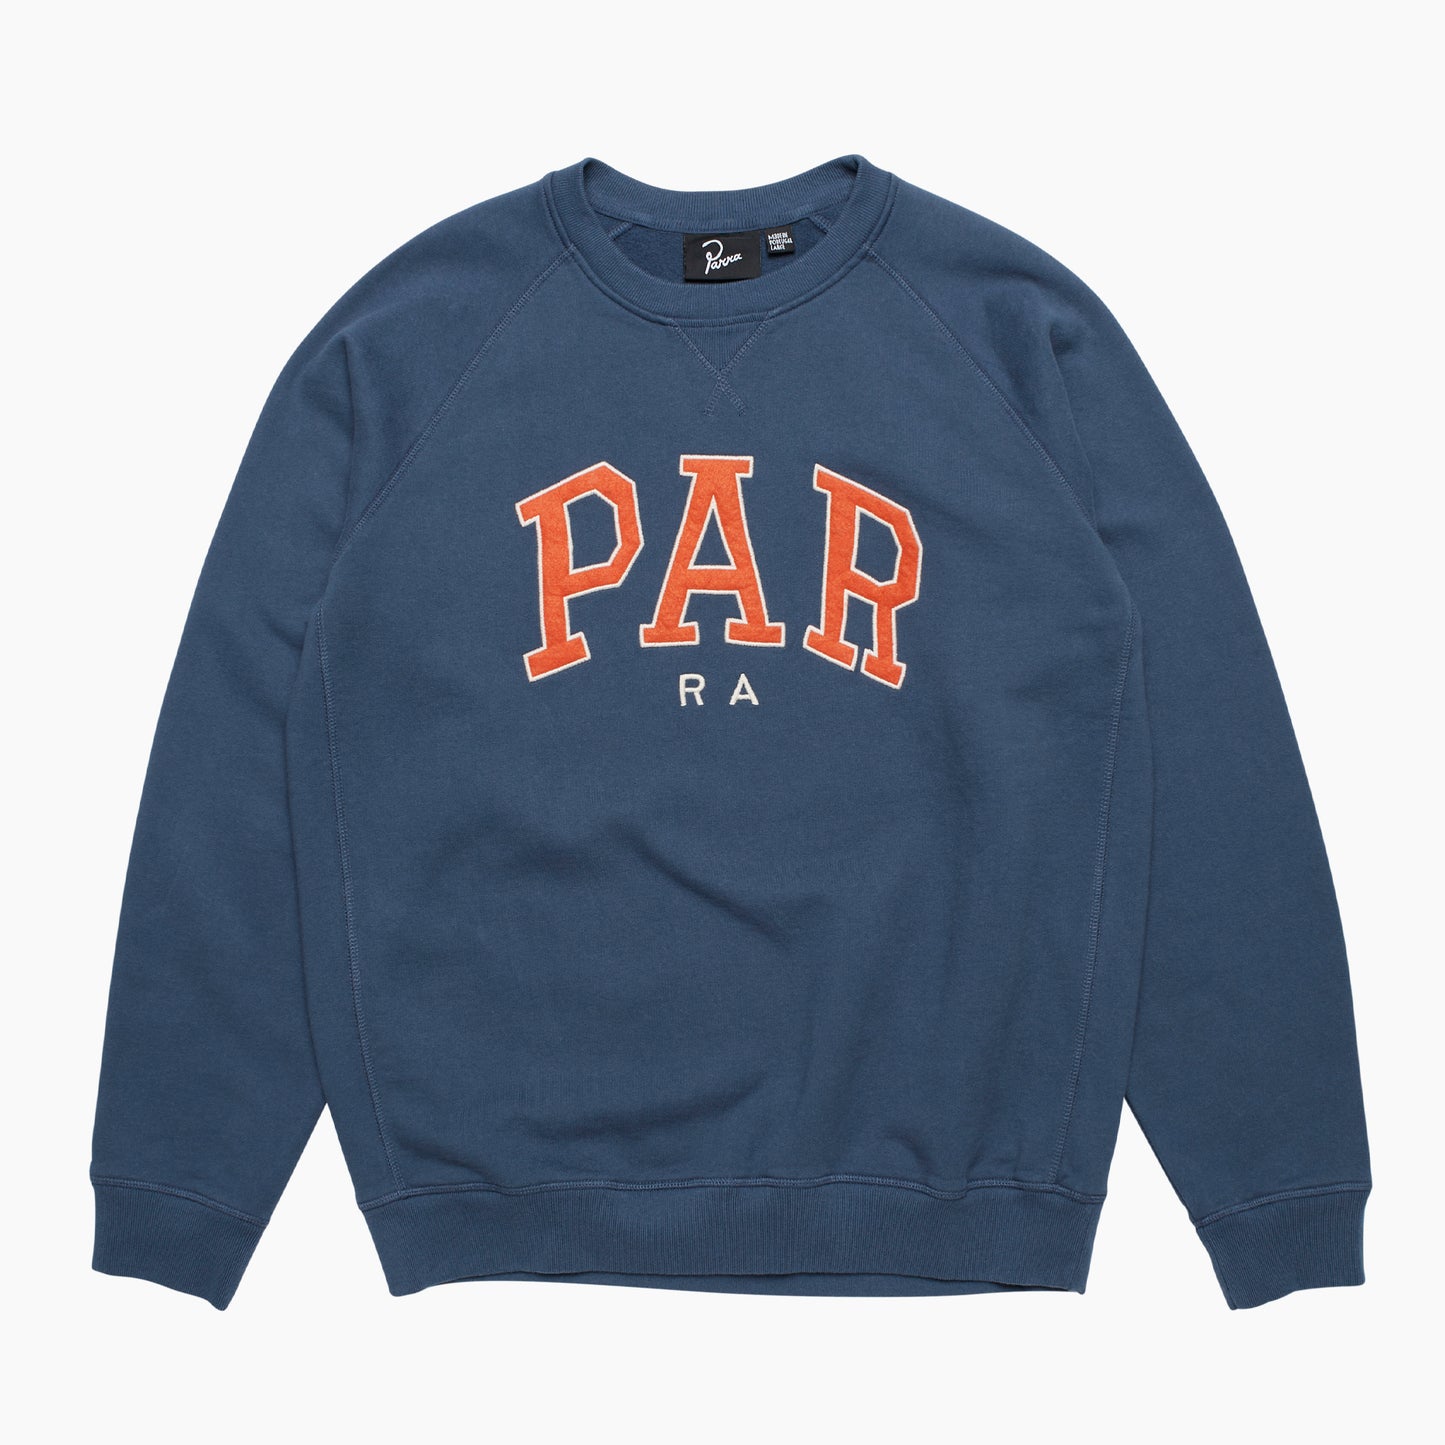 By Parra Educational Crew Sweat